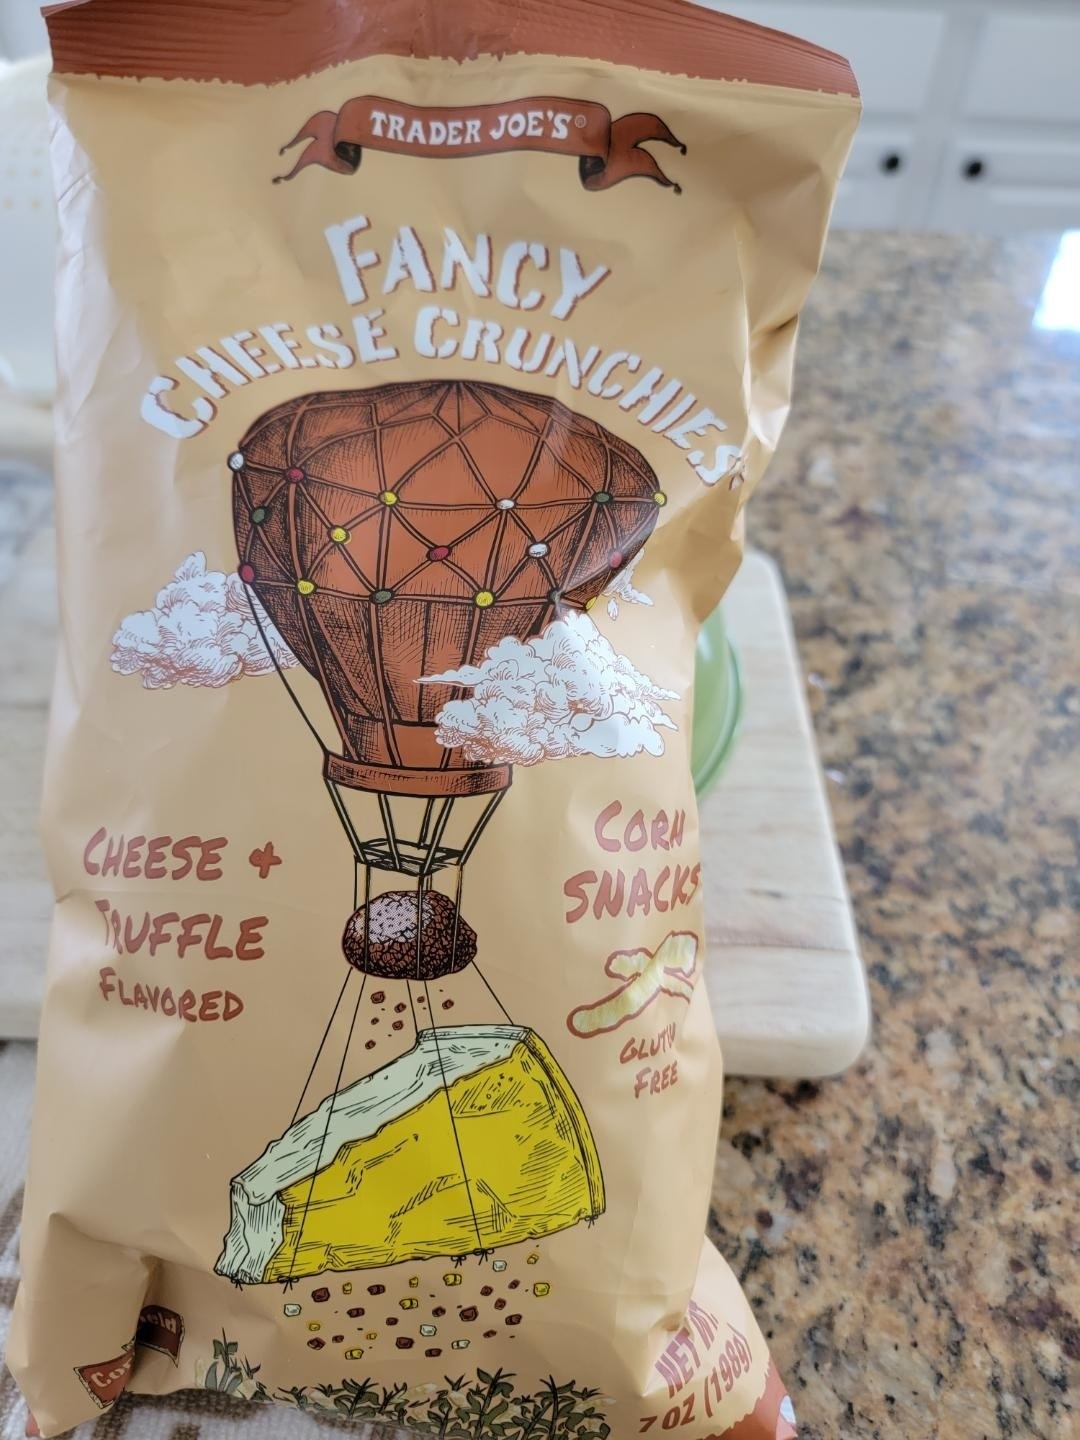 Fancy Cheese Crunchies